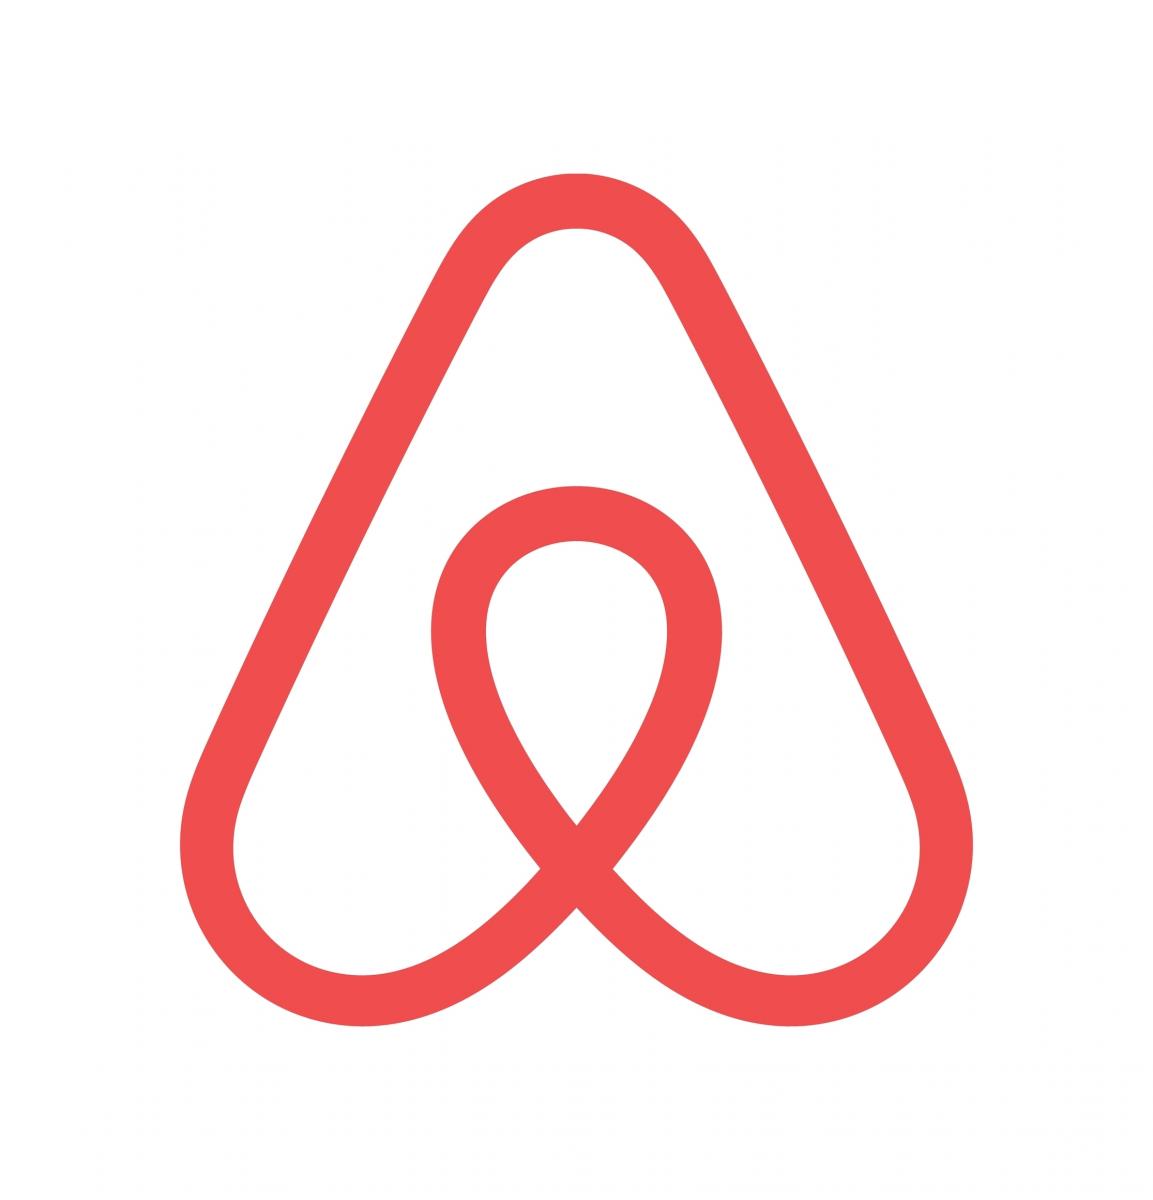 Airbnb supply 'slashed 80% by new controls' - report bombshell 